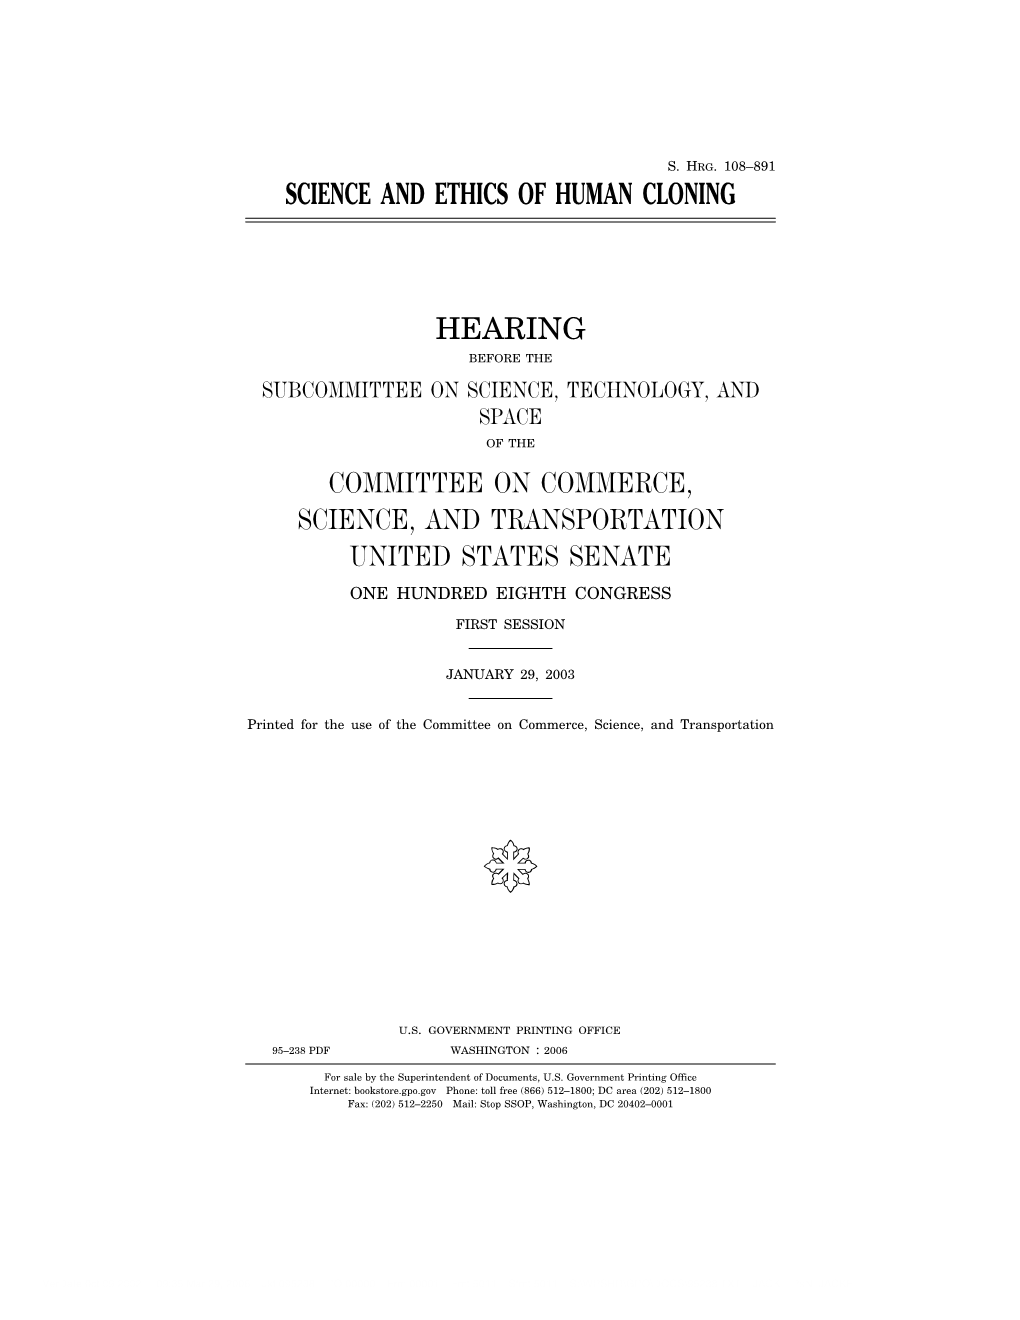 Science and Ethics of Human Cloning Hearing Committee